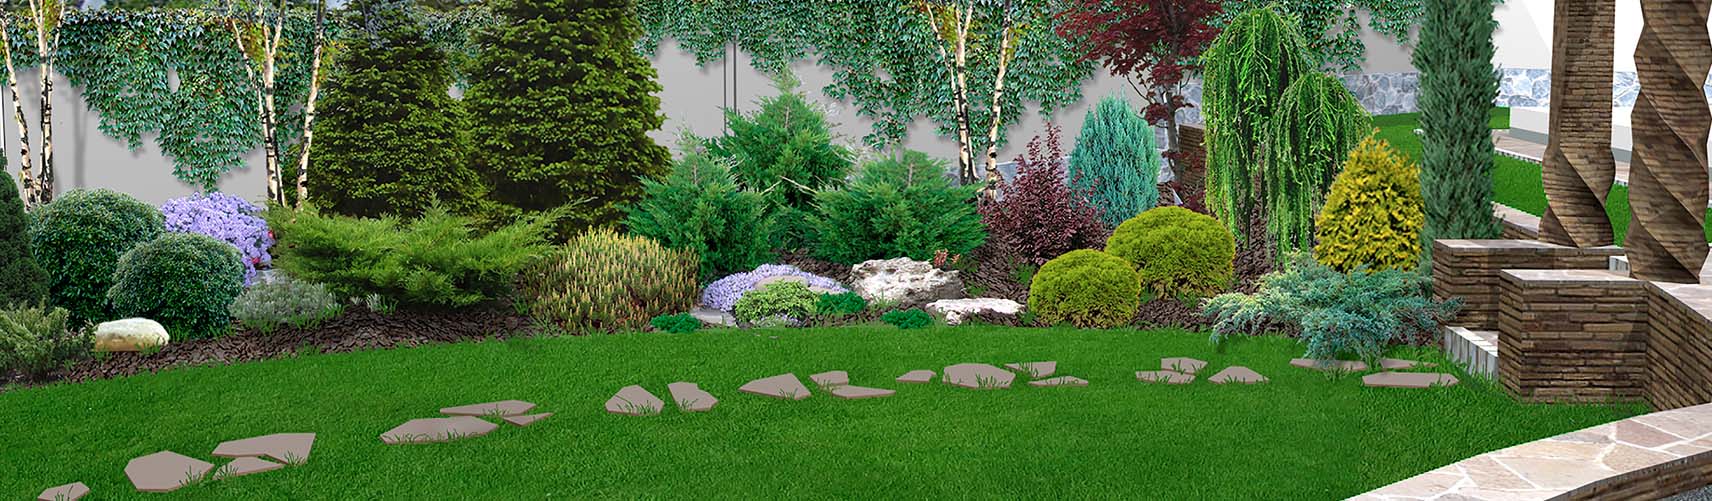 Simcoe Landscaping Company, Landscaper and Landscaping Services